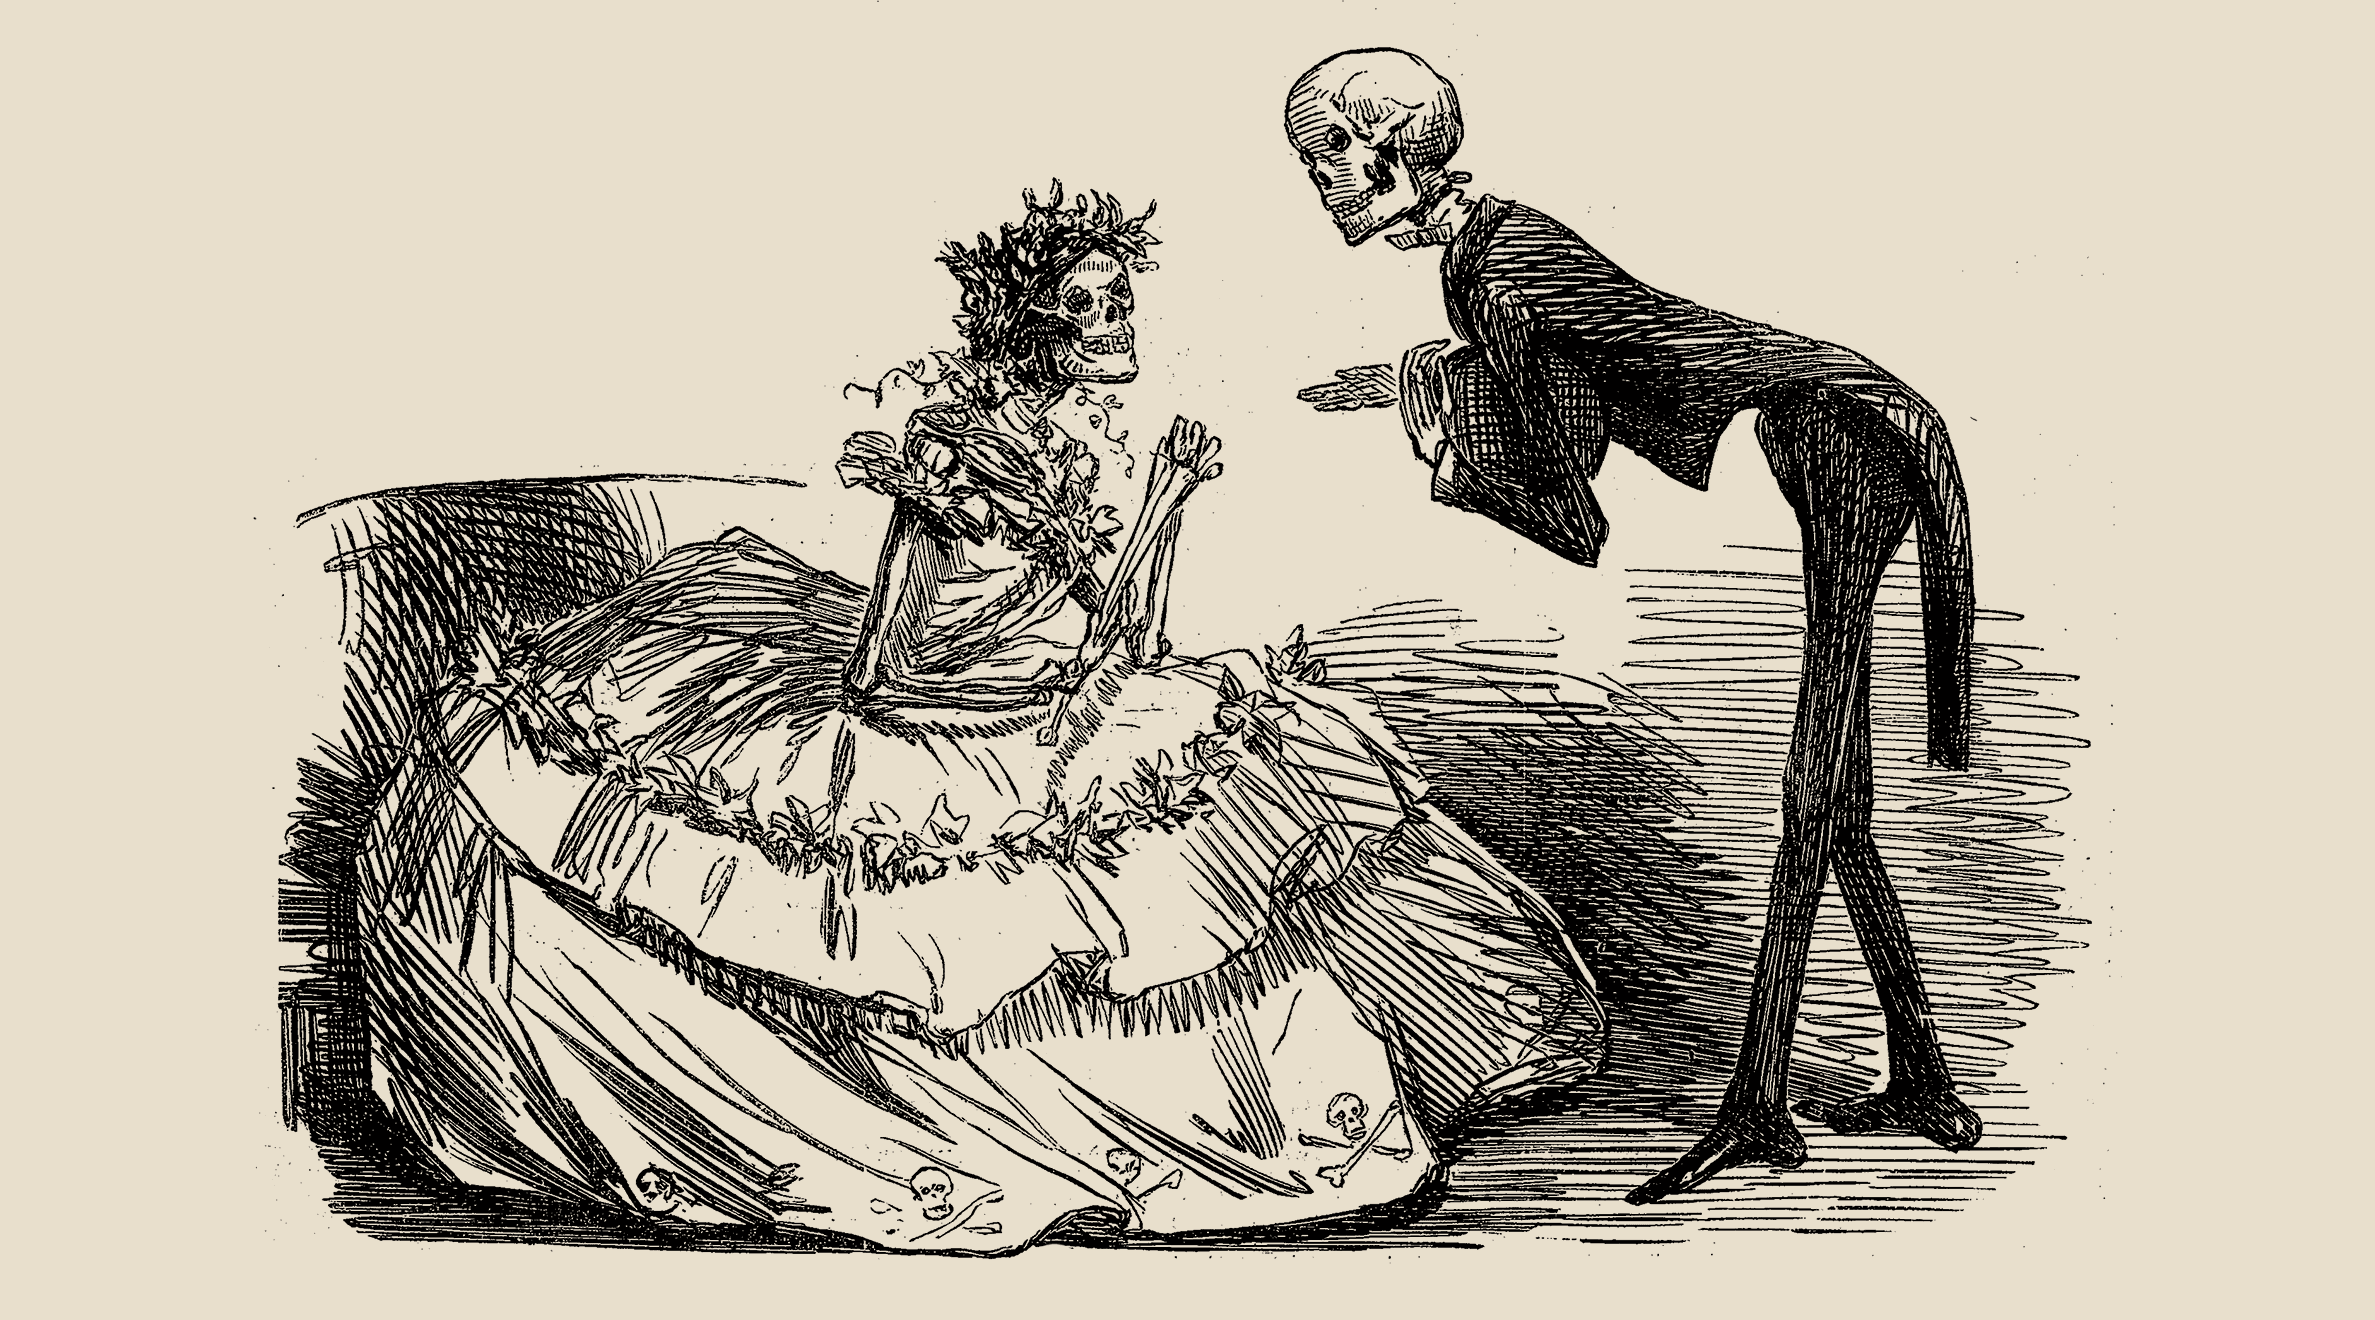 Two skeletons, one wears a wedding dress and the other wears a tuxedo